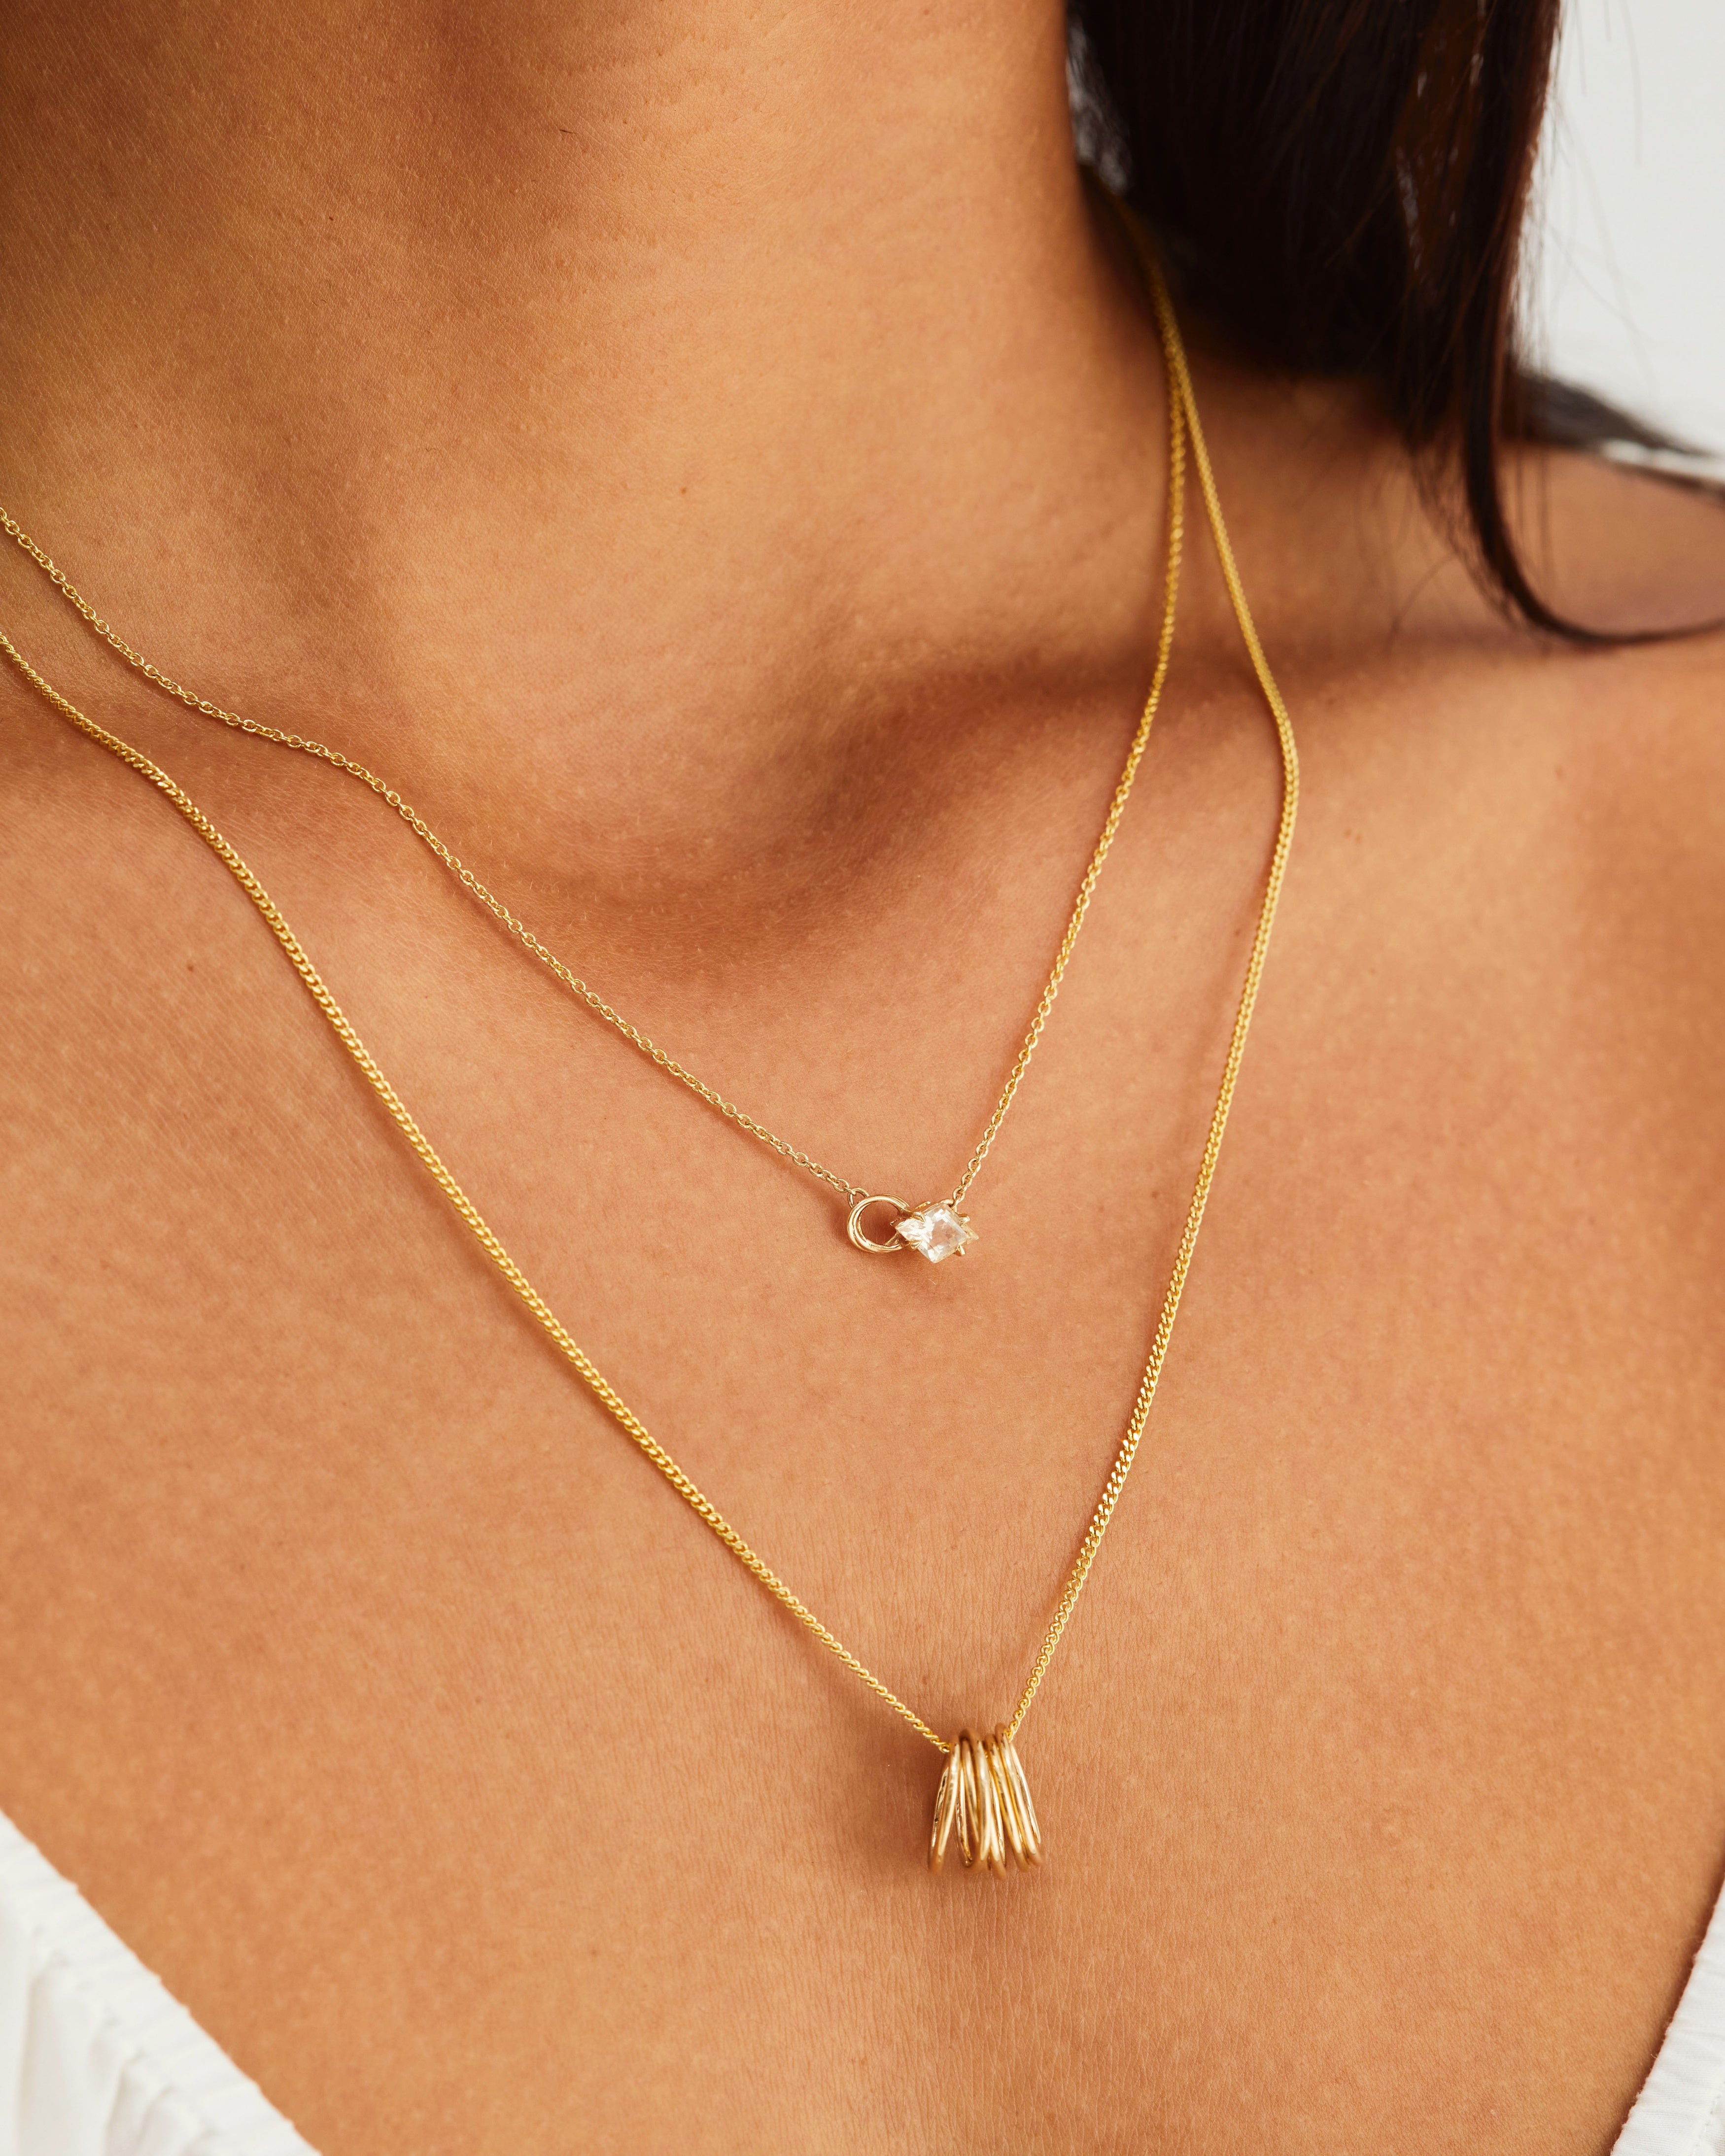 A woman wearing the Nuna Necklace | Savannah Sunstone and the Six Oval Necklace, both in yellow gold.